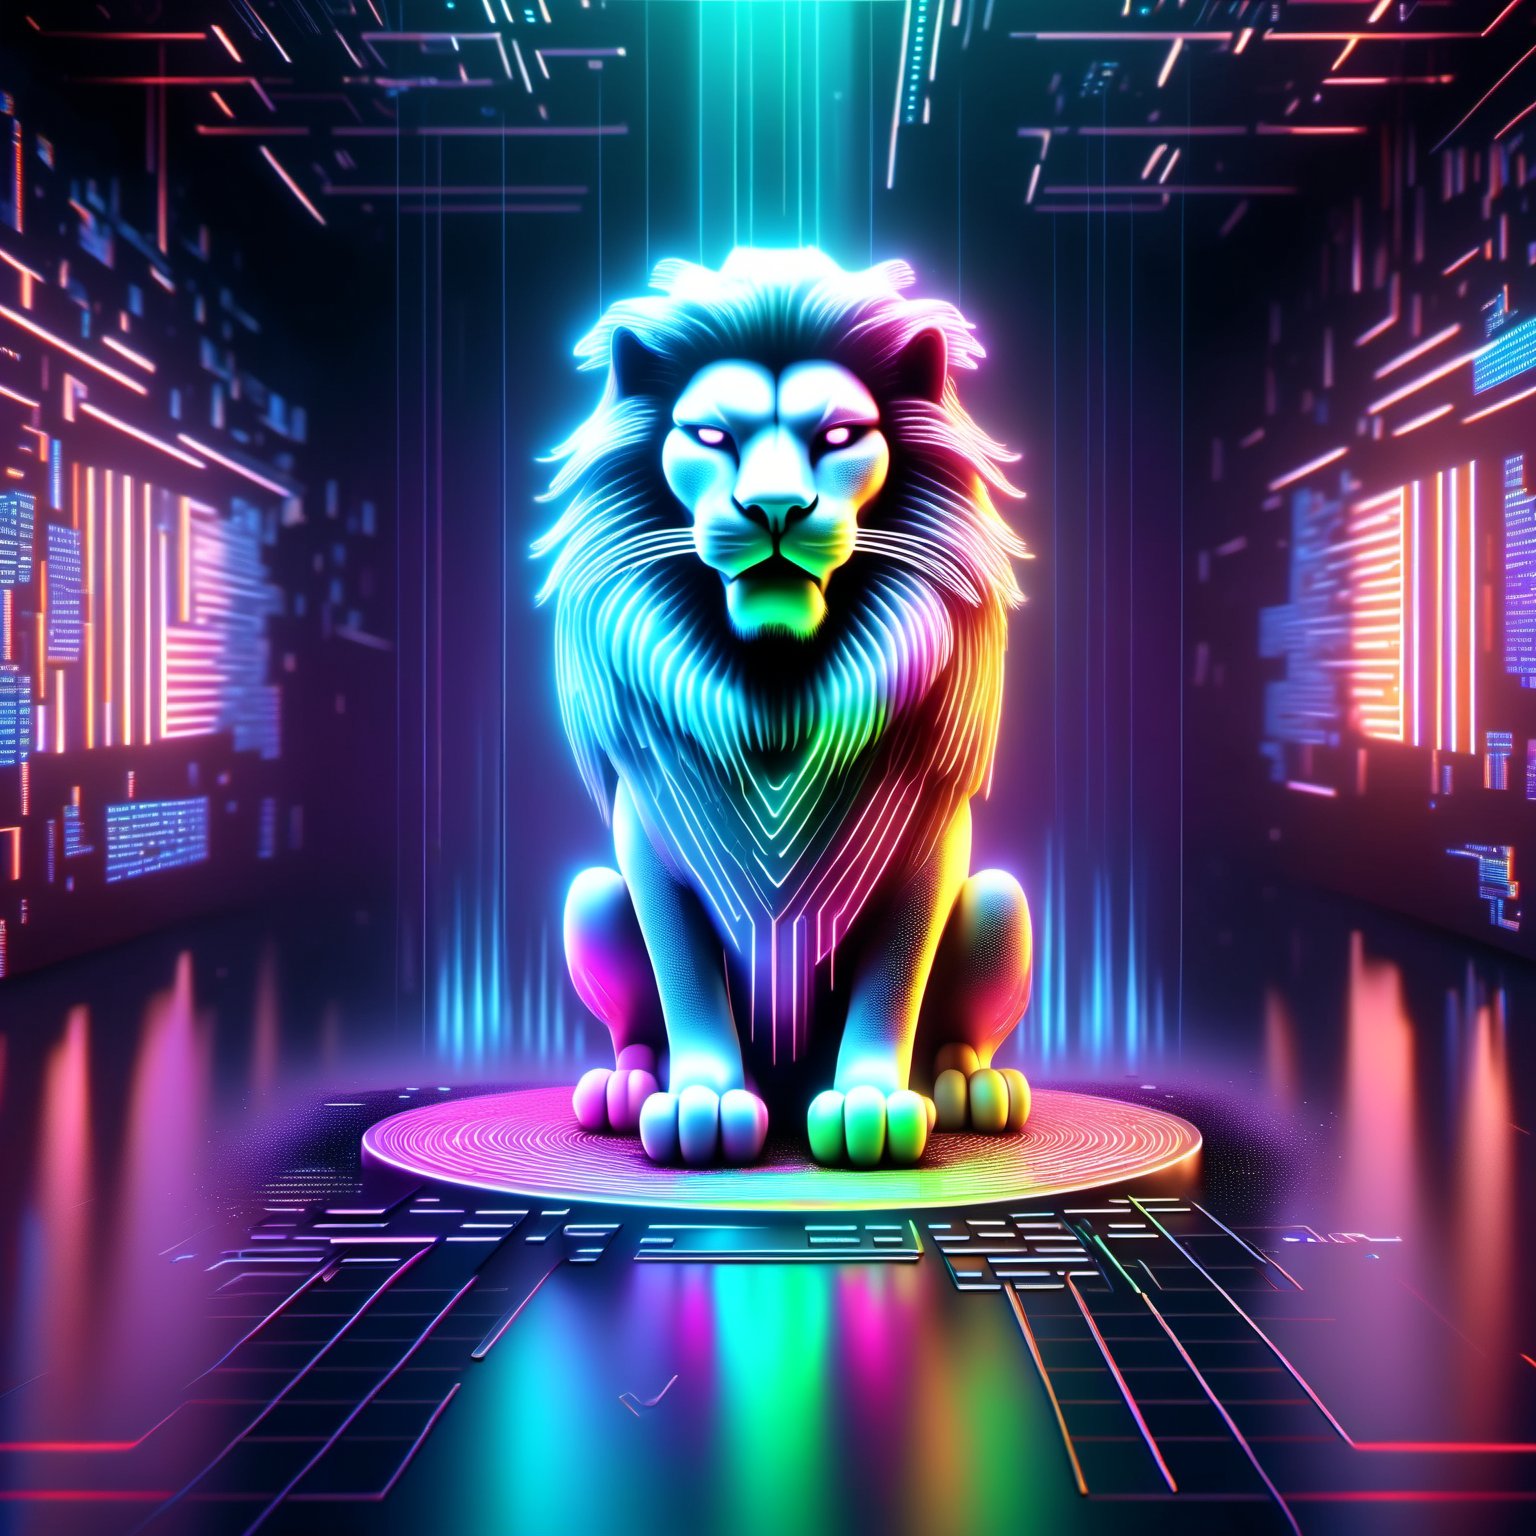 ((( Mad Cat TEXT))), neon mad lion face, Neon multy colored matrix code falling from the top in the background, chip, neon technology, technology concepts, intelligence concepts HD wallpaper,DonMH010D15pl4yXL , 3D SINGLE TEXT,Leonardo Style